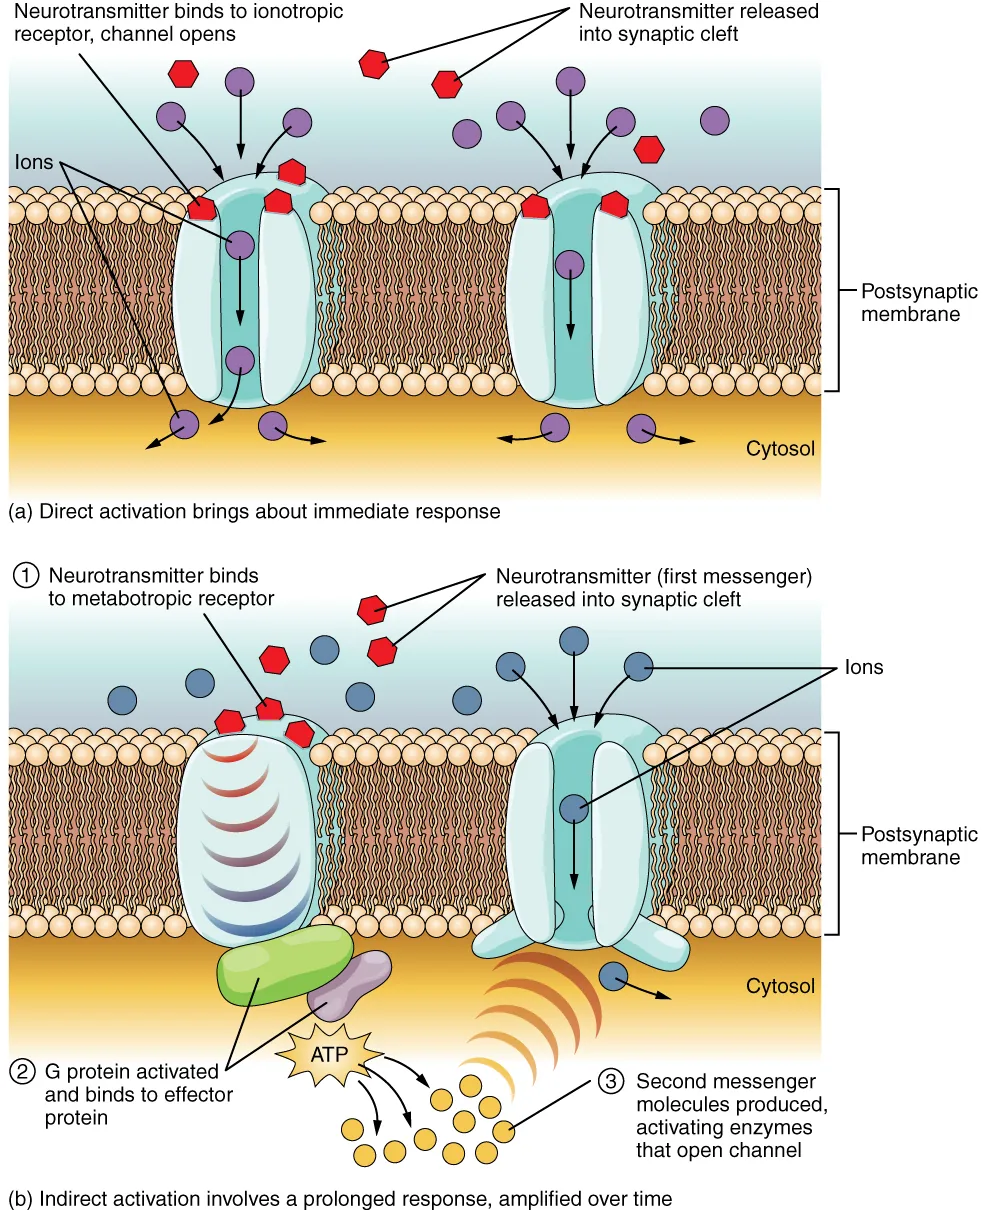 This diagram contains two images, labeled A and B. Both images show a cross section of a postsynaptic membrane. There are two proteins embedded in each of the two membrane cross sections. In diagram A, direct activation brings about an immediate response. Here, both of the membrane proteins are ion channels. Several hexagonal neurotransmitters bind to ionotropic receptors on the extracellular fluid side of the channels. The binding of neurotransmitters causes the channels to open, allowing ions to flow from the extracellular fluid into the cytosol. Image B shows indirect activation, which involves a prolonged response, amplified over time. Here, one of the cell membrane proteins is solid while the other is a channel. Neurotransmitters bind to metabotropic receptors on the extracellular side of the solid protein. This triggers the solid protein to activate a G protein in the cytoplasm. The G protein binds to an effector protein in the cytoplasm, which results in the production of several second messenger particles. The second messenger activates enzymes that open the channel protein, allowing ions to enter the cytoplasm.